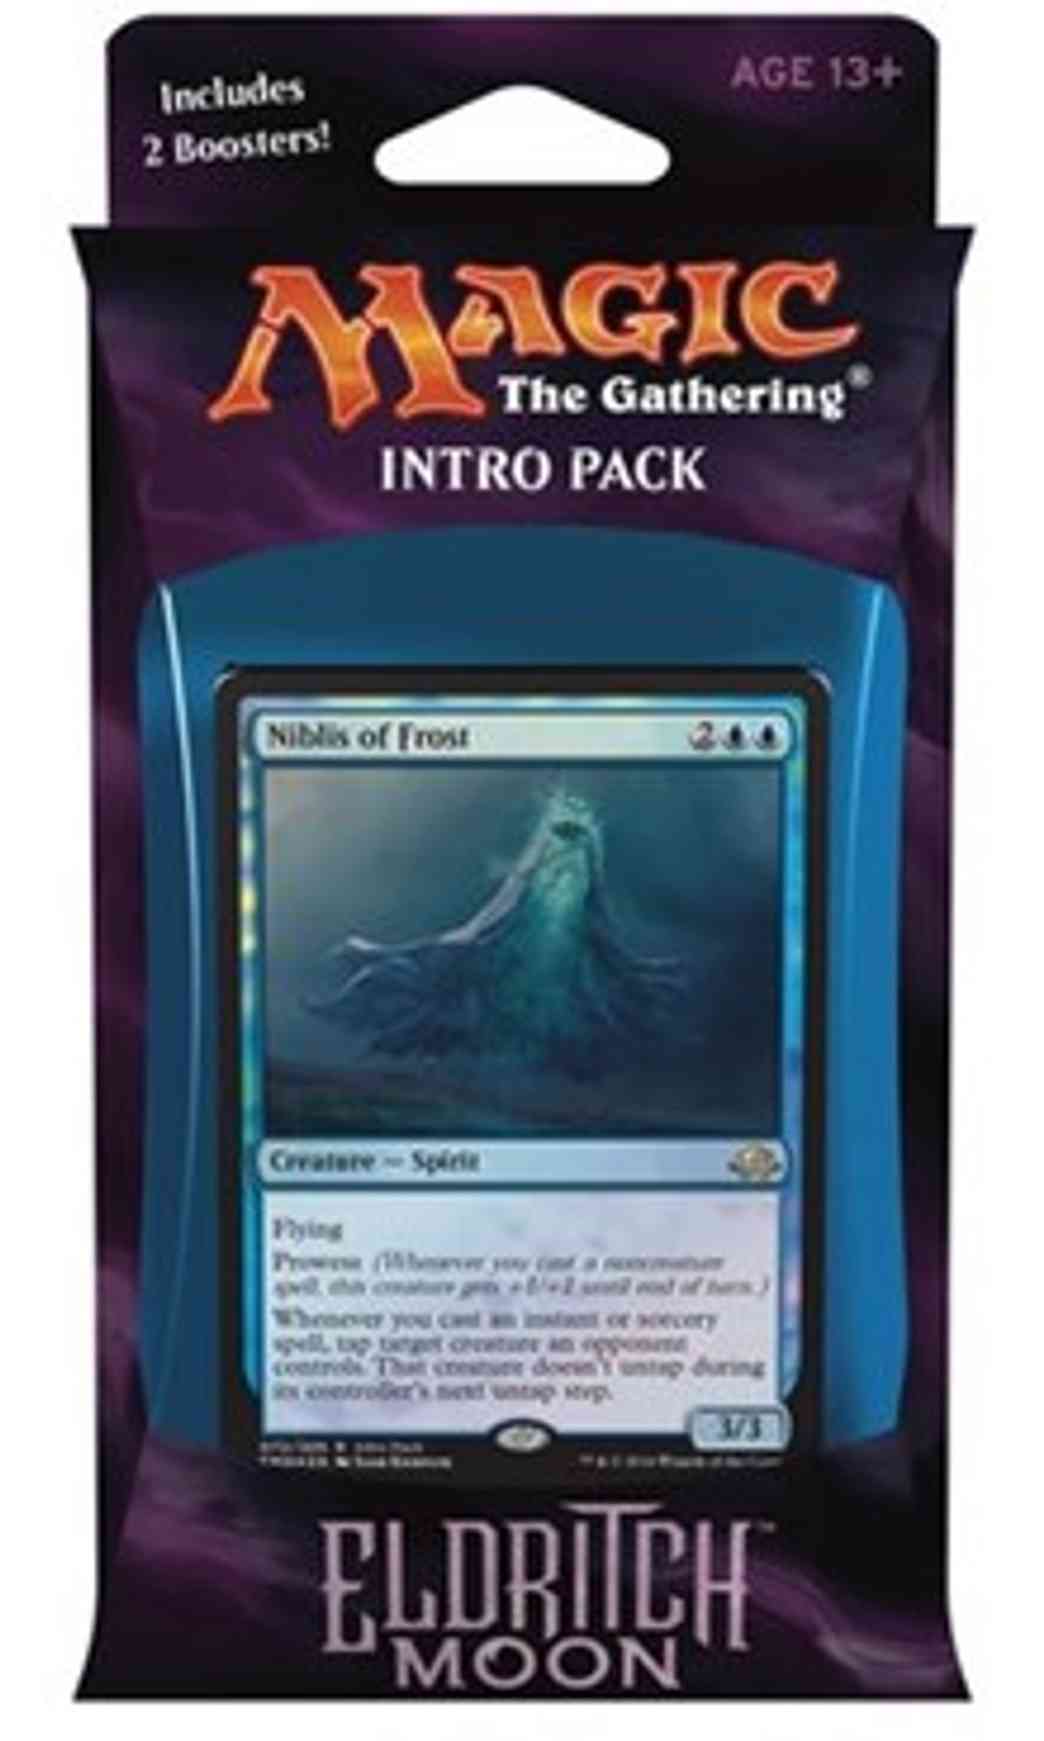 Eldritch Moon Intro Pack - Blue magic card front